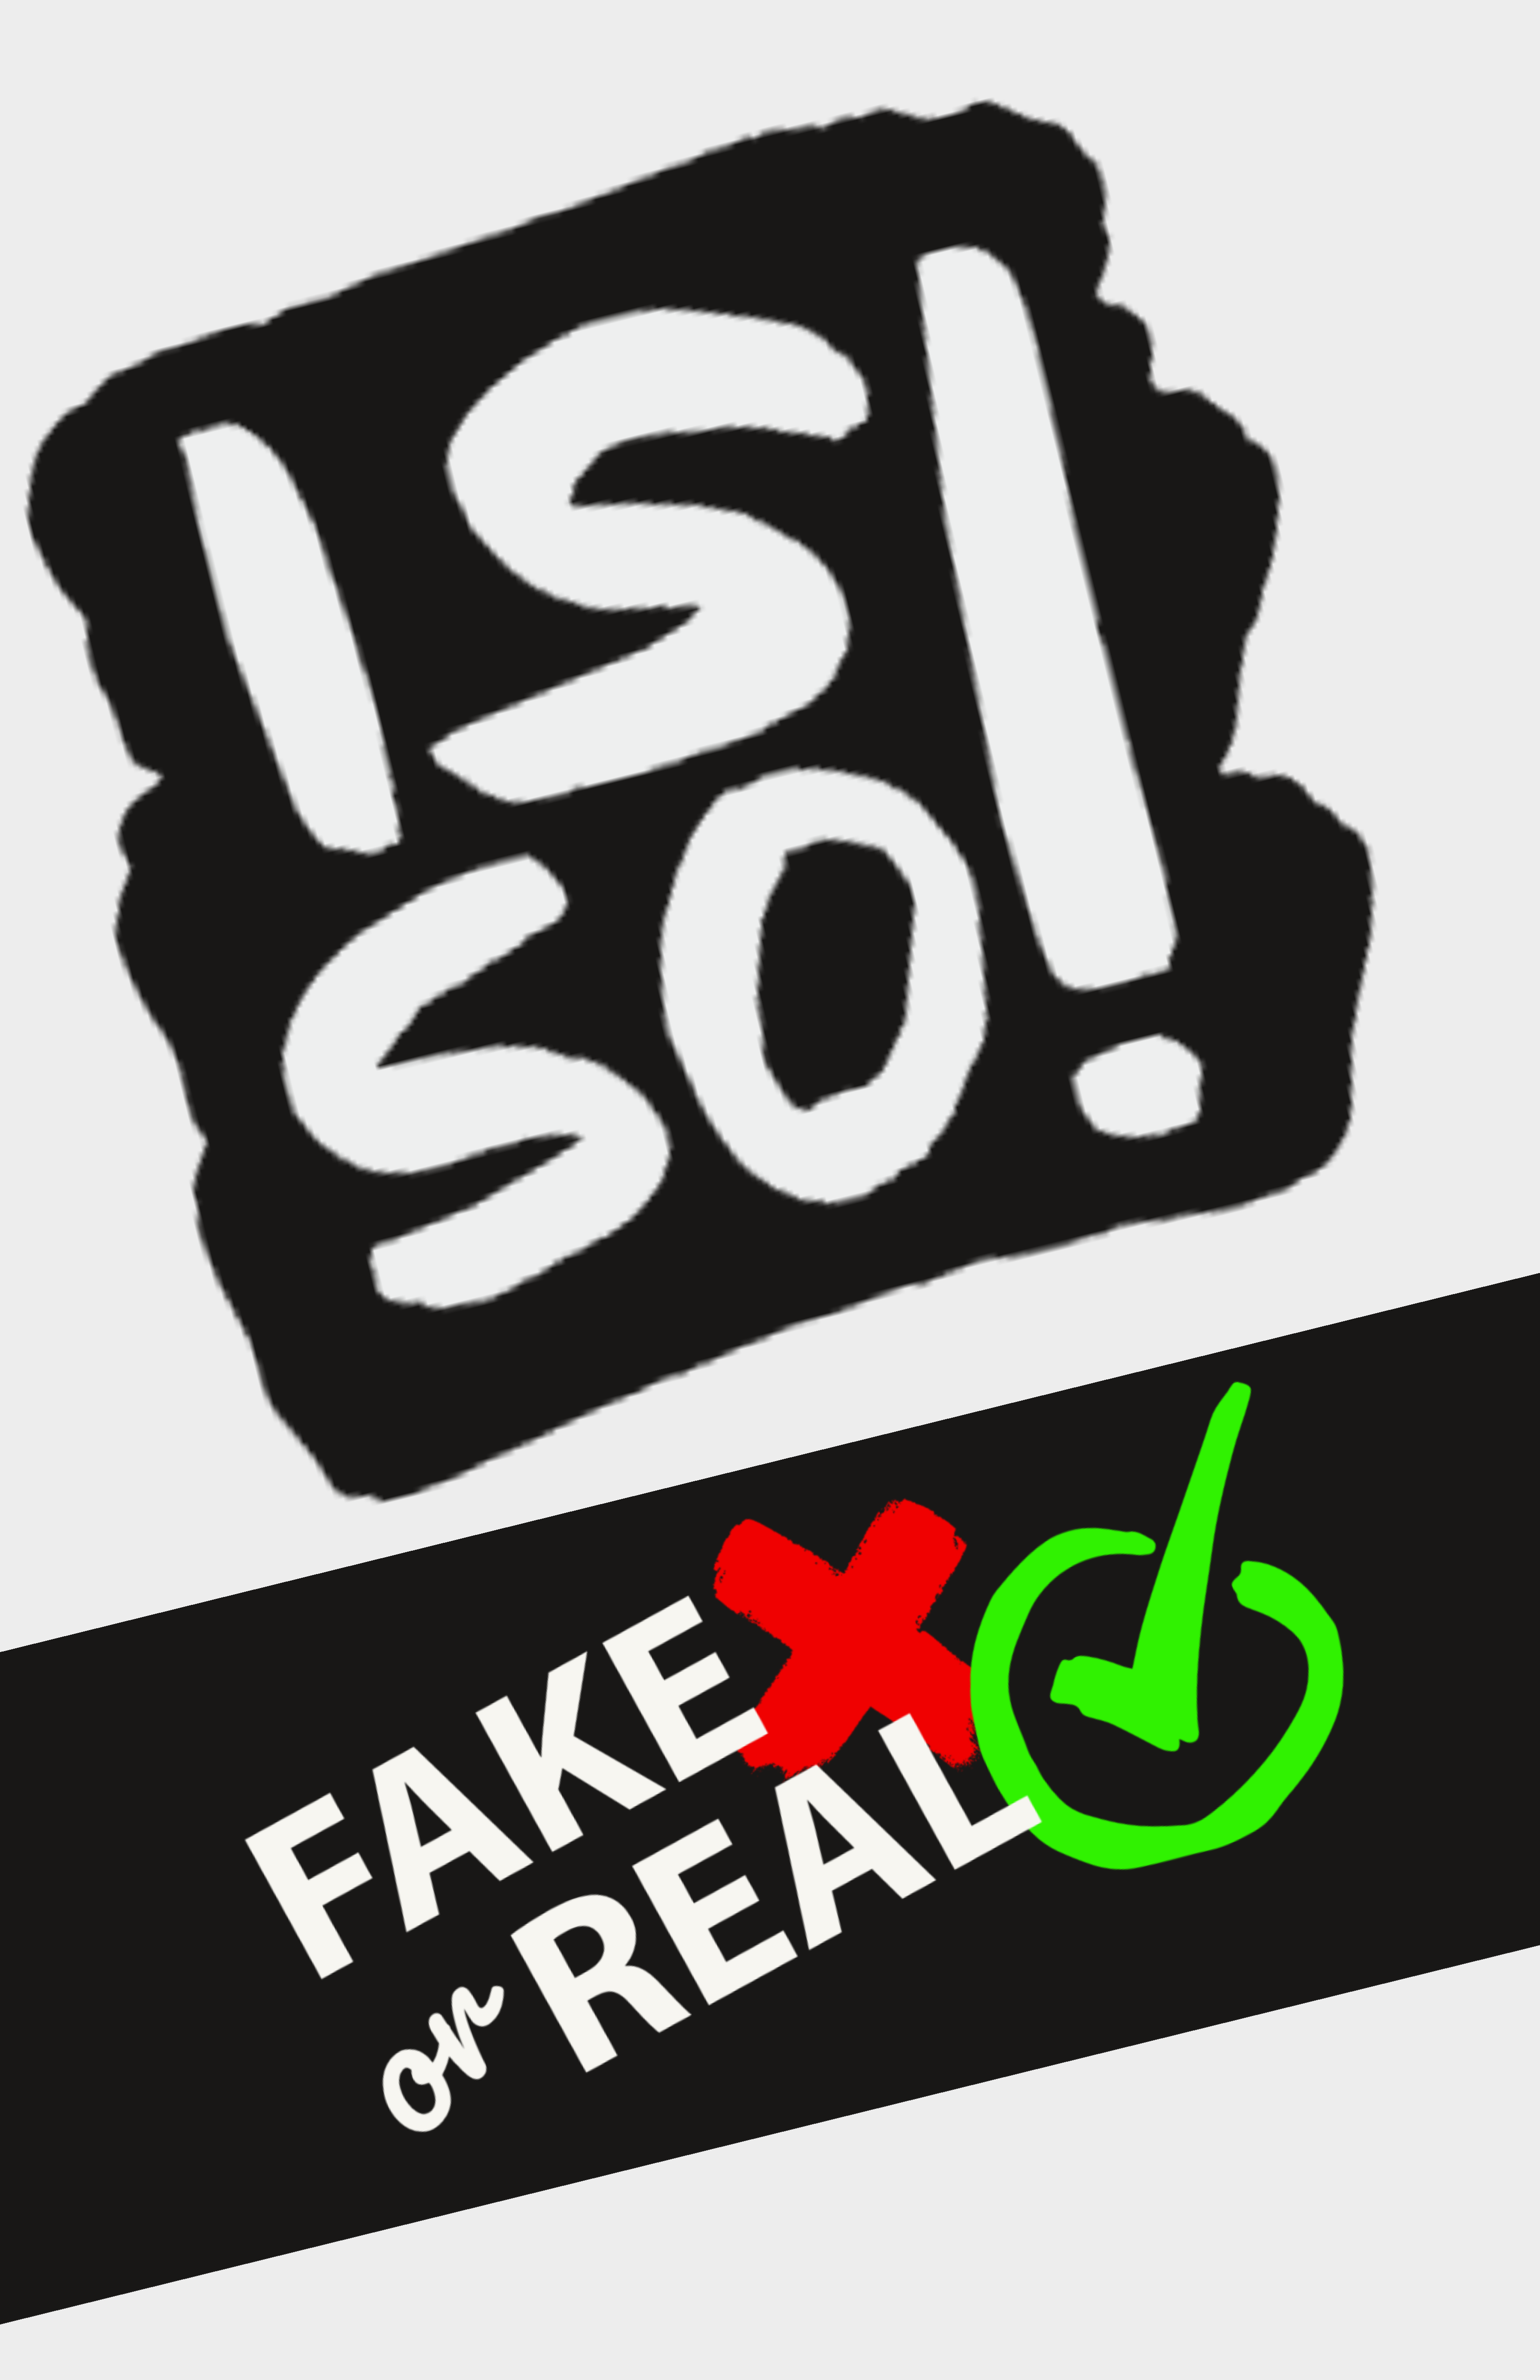 Logos des Projektes Isso! und Fake or Real